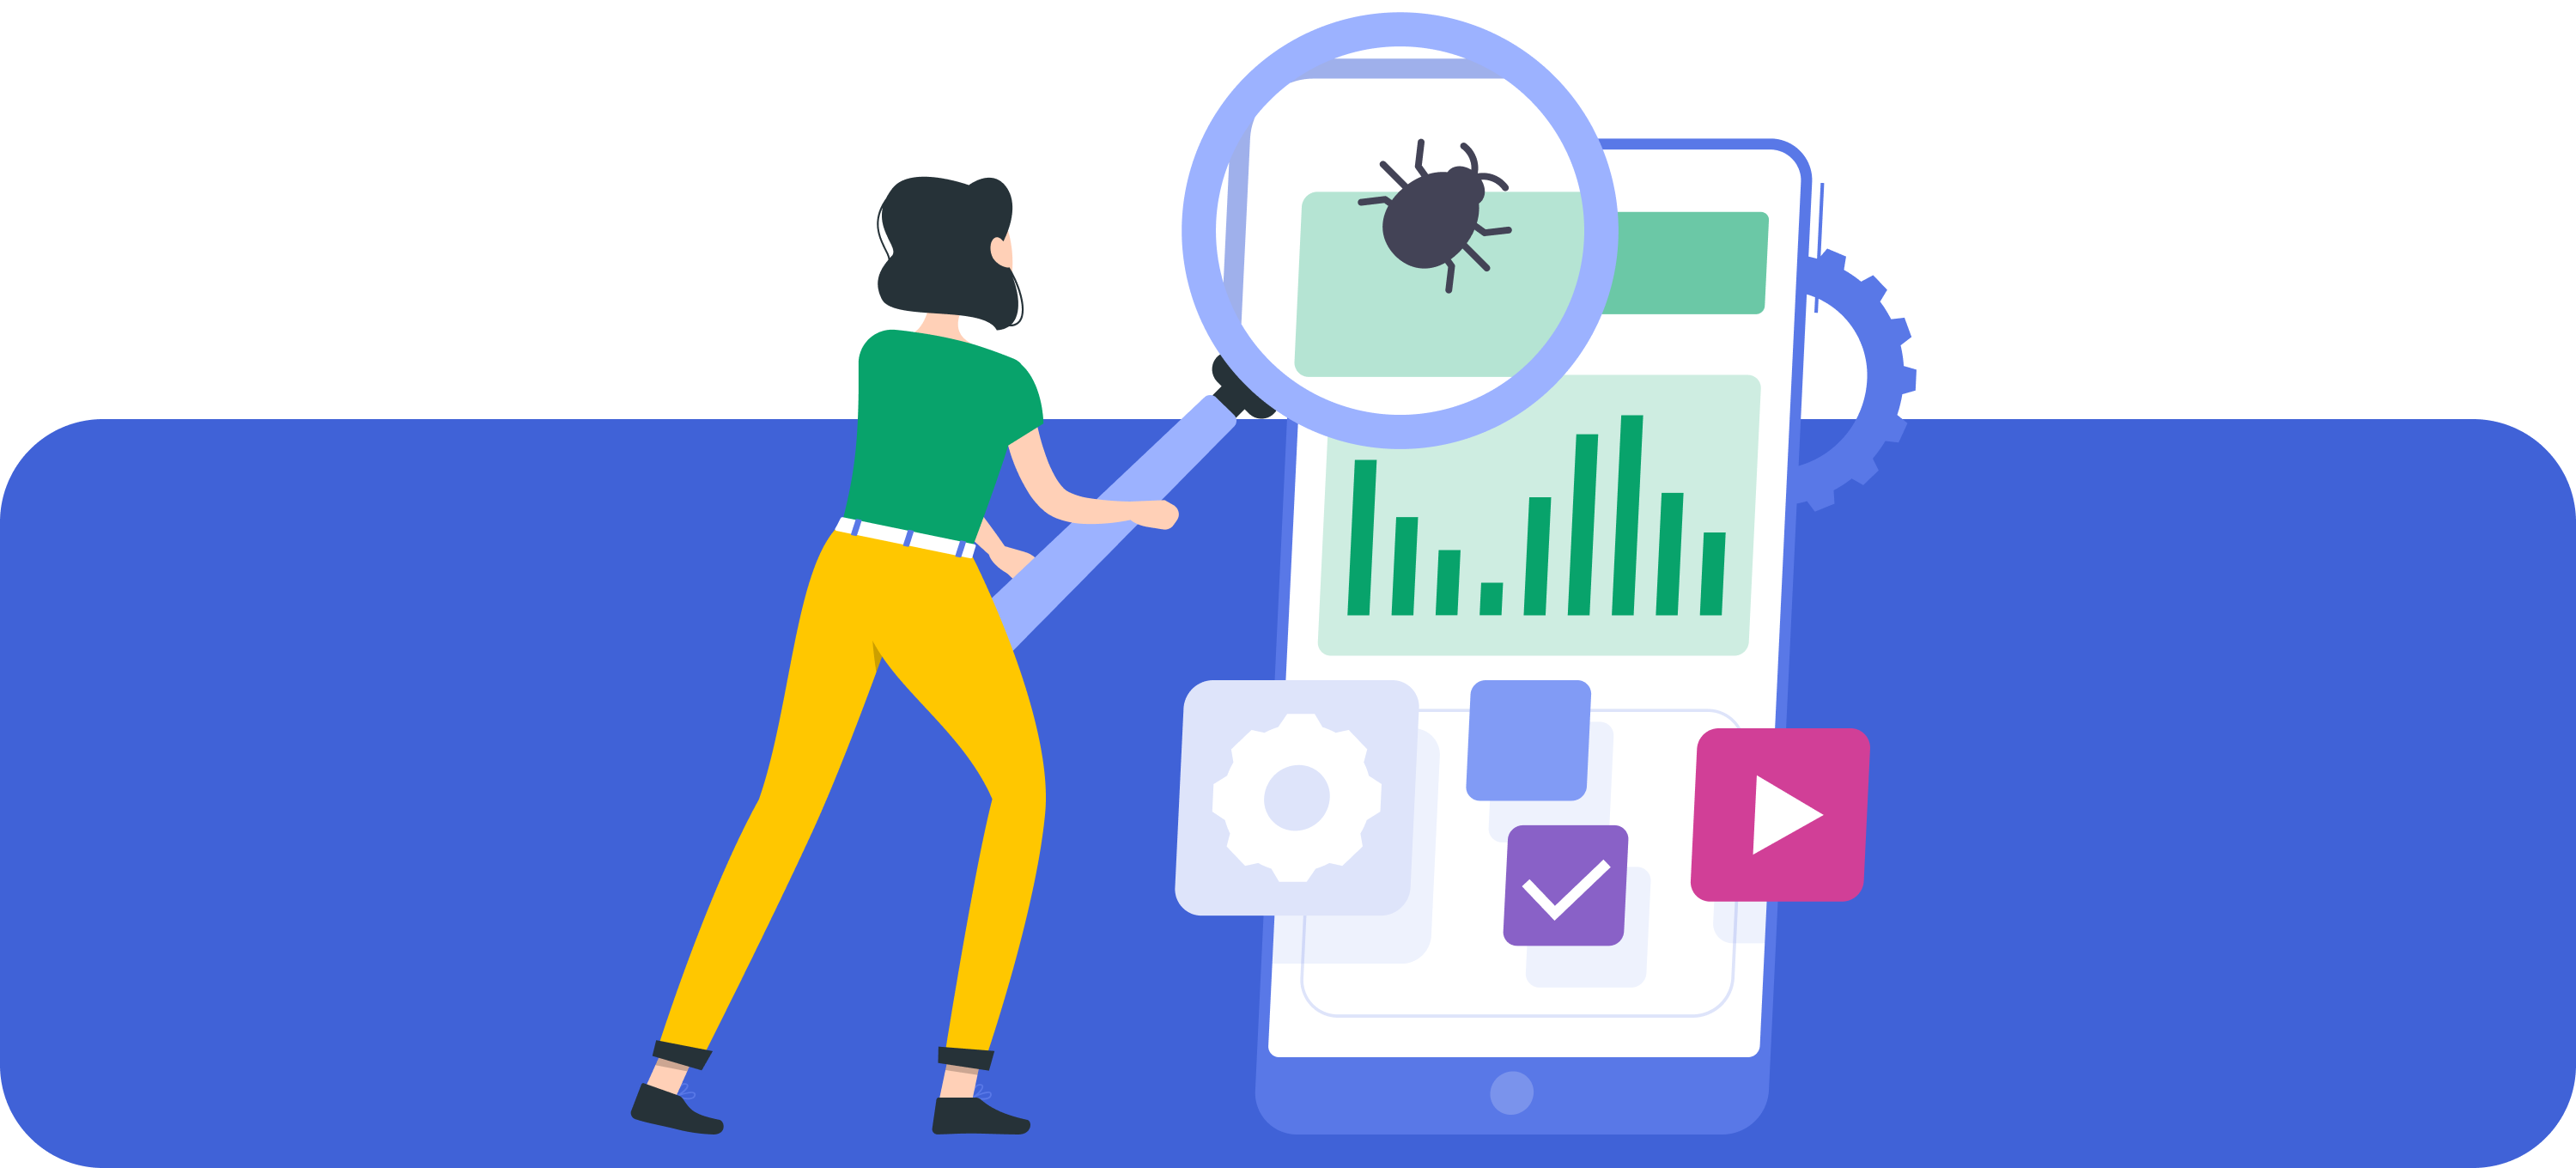 The ultimate guide to app testing: tips and tricks you need to know